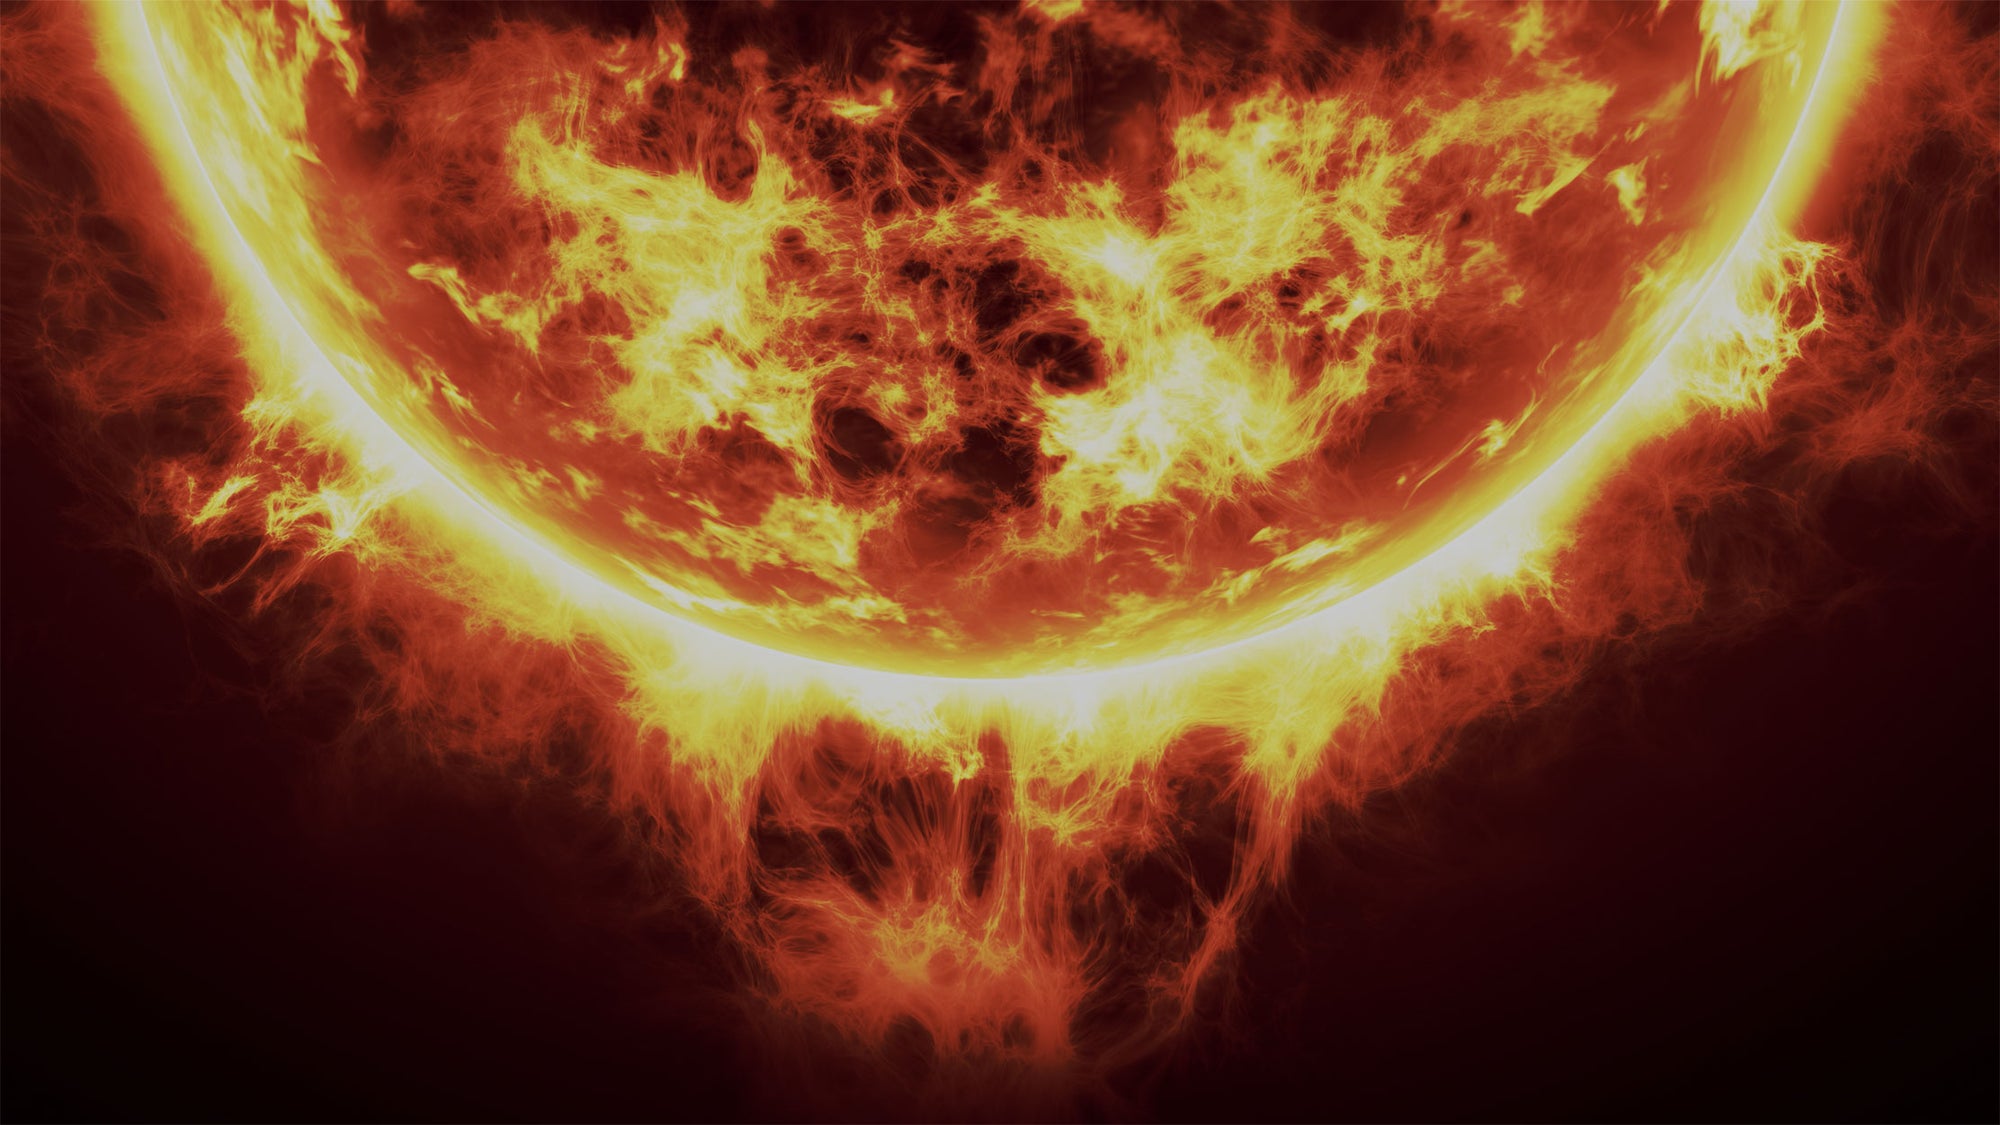 An image of a sun with flames on it.